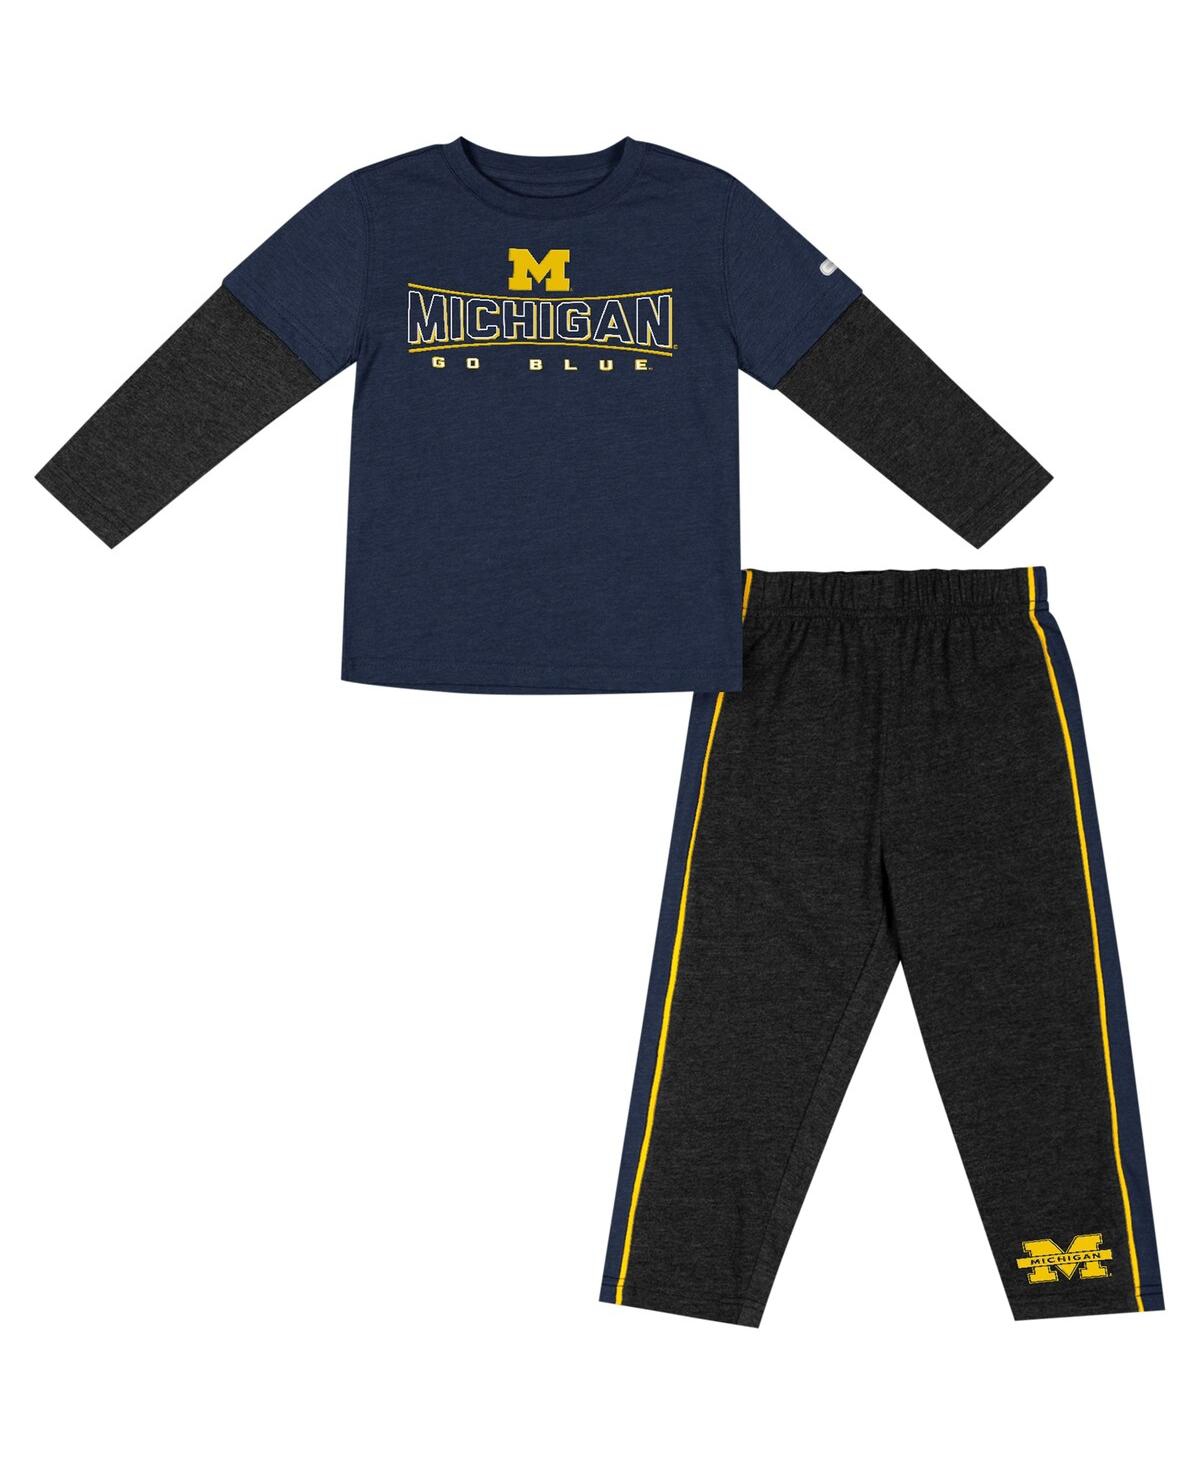 Colosseum Babies' Toddler Boys And Girls  Navy, Black Notre Dame Fighting Irish Long Sleeve T-shirt And Pants In Navy,black